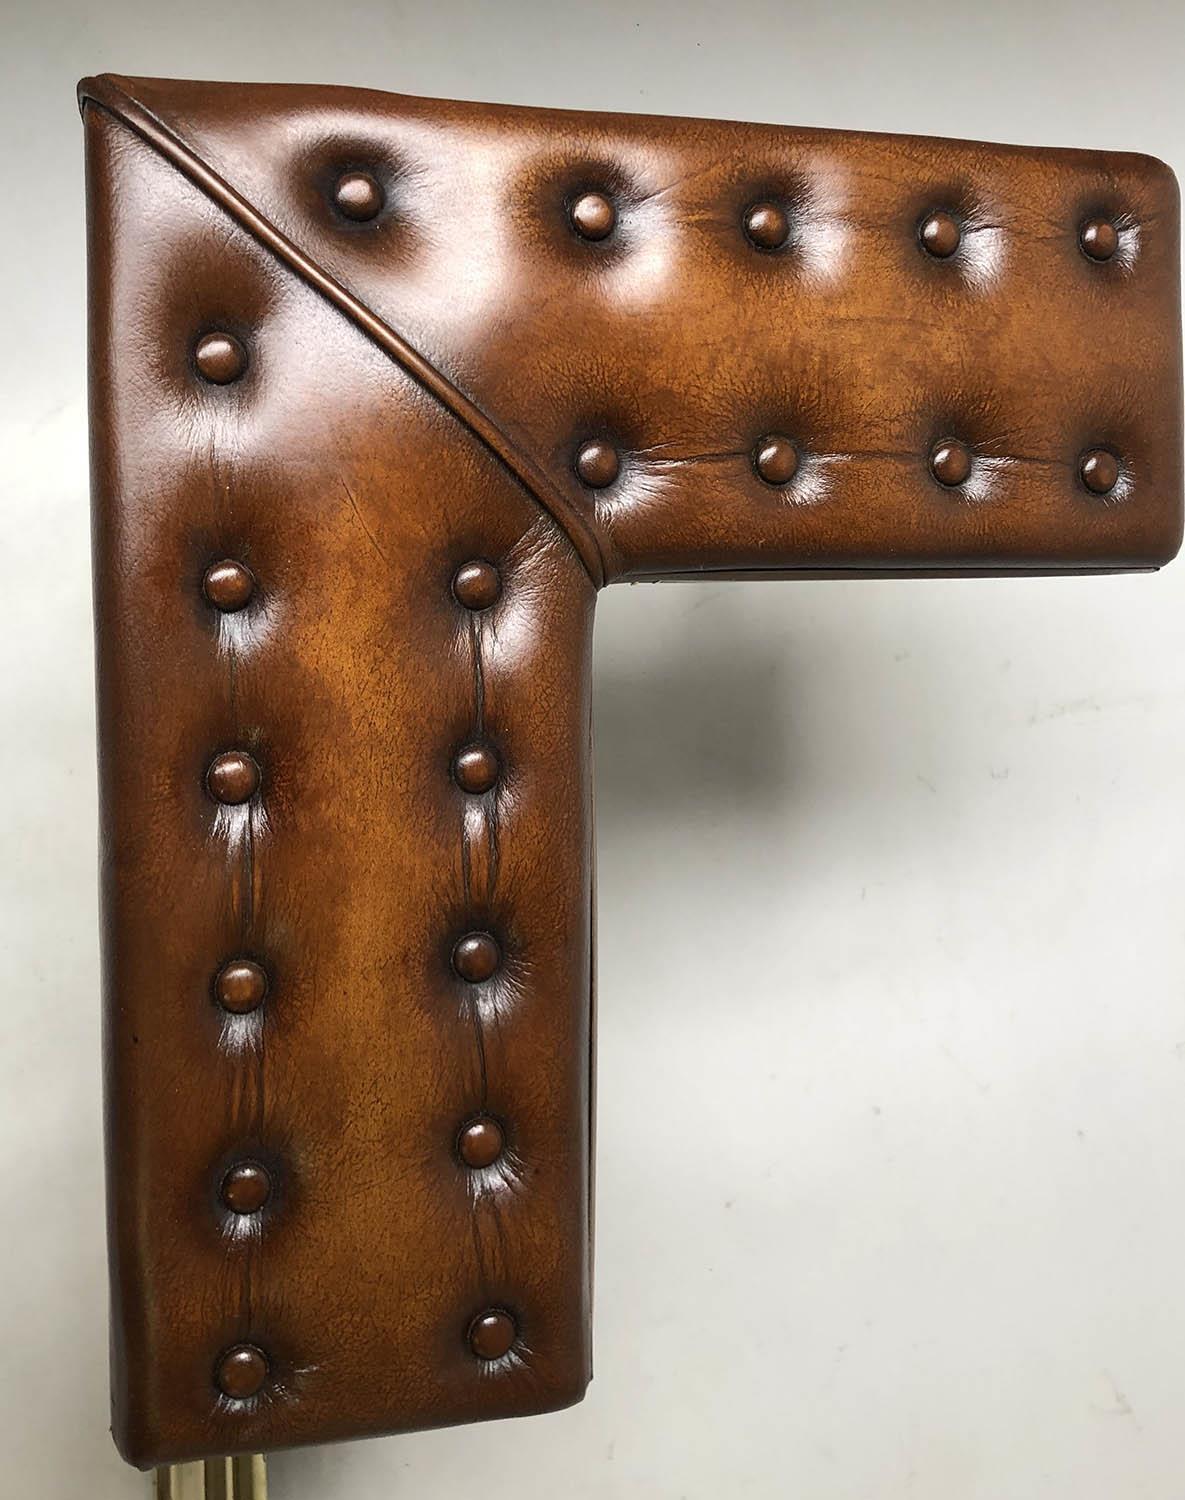 CLUB FENDER, Victorian style brass with buttoned brown leather pads and balustrade support, 140cm - Image 5 of 6